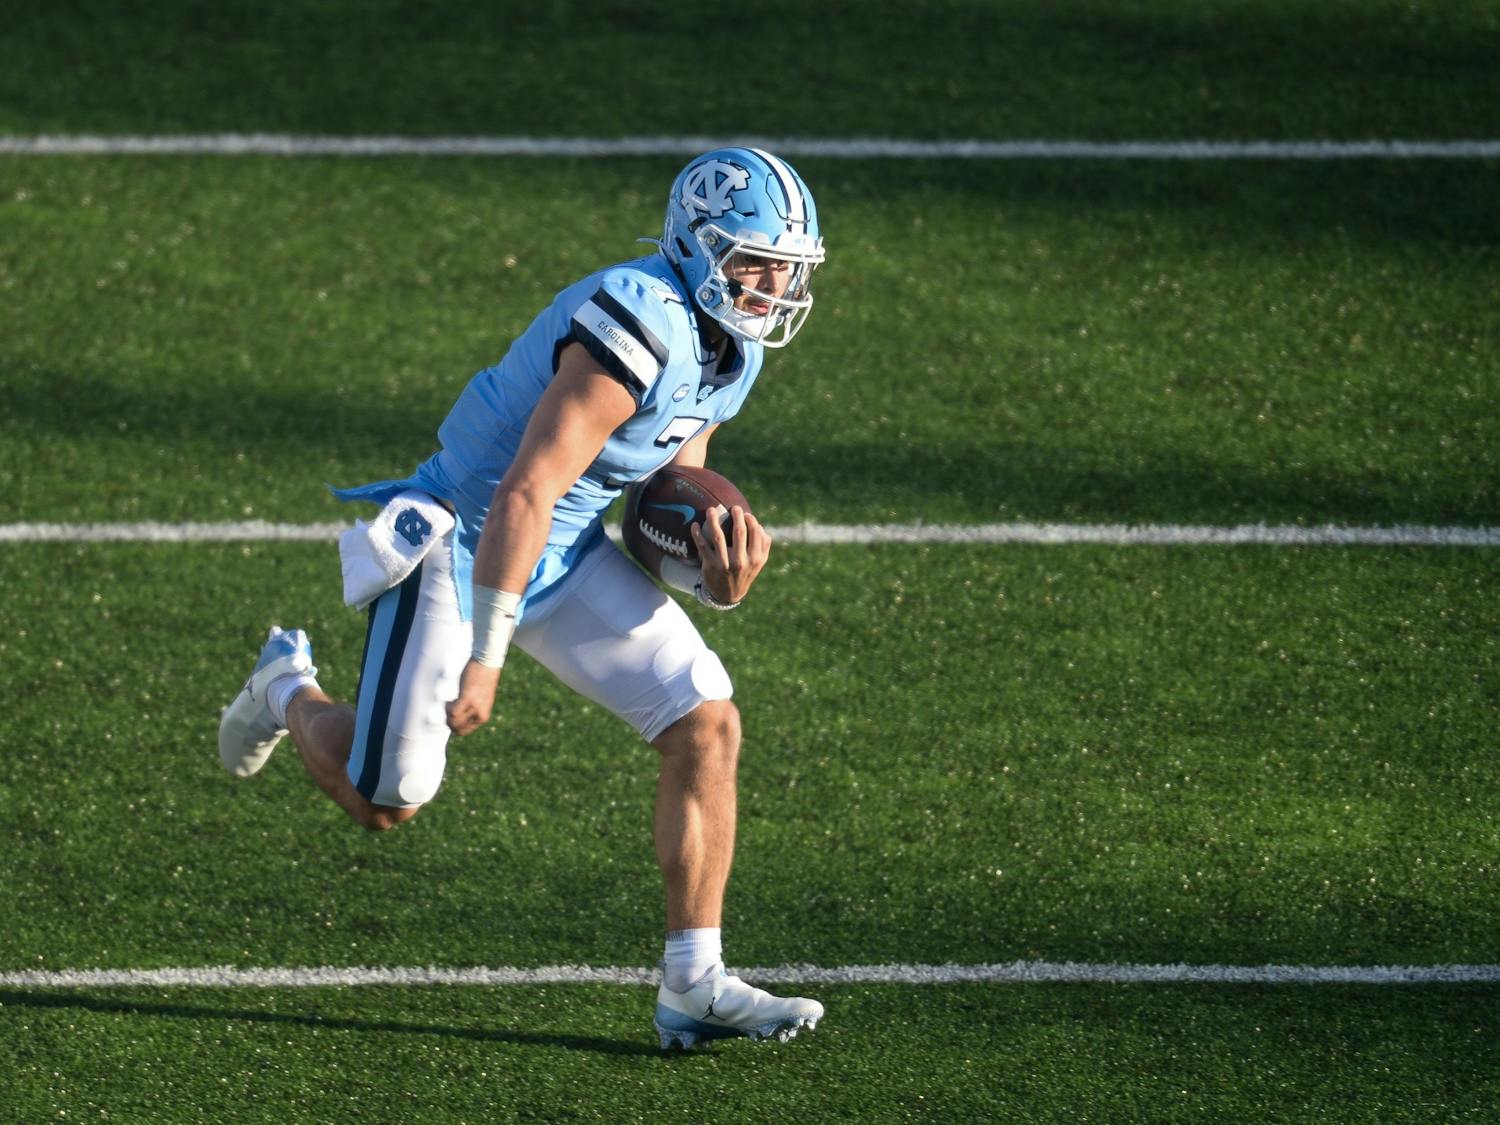 UNC's sophomore quarterback Sam Howell runs the ball downfield during a game in Kenan Memorial Stadium during a game against Wake Forest on Saturday, Nov. 14, 2020. UNC beat Wake Forest 59-53.